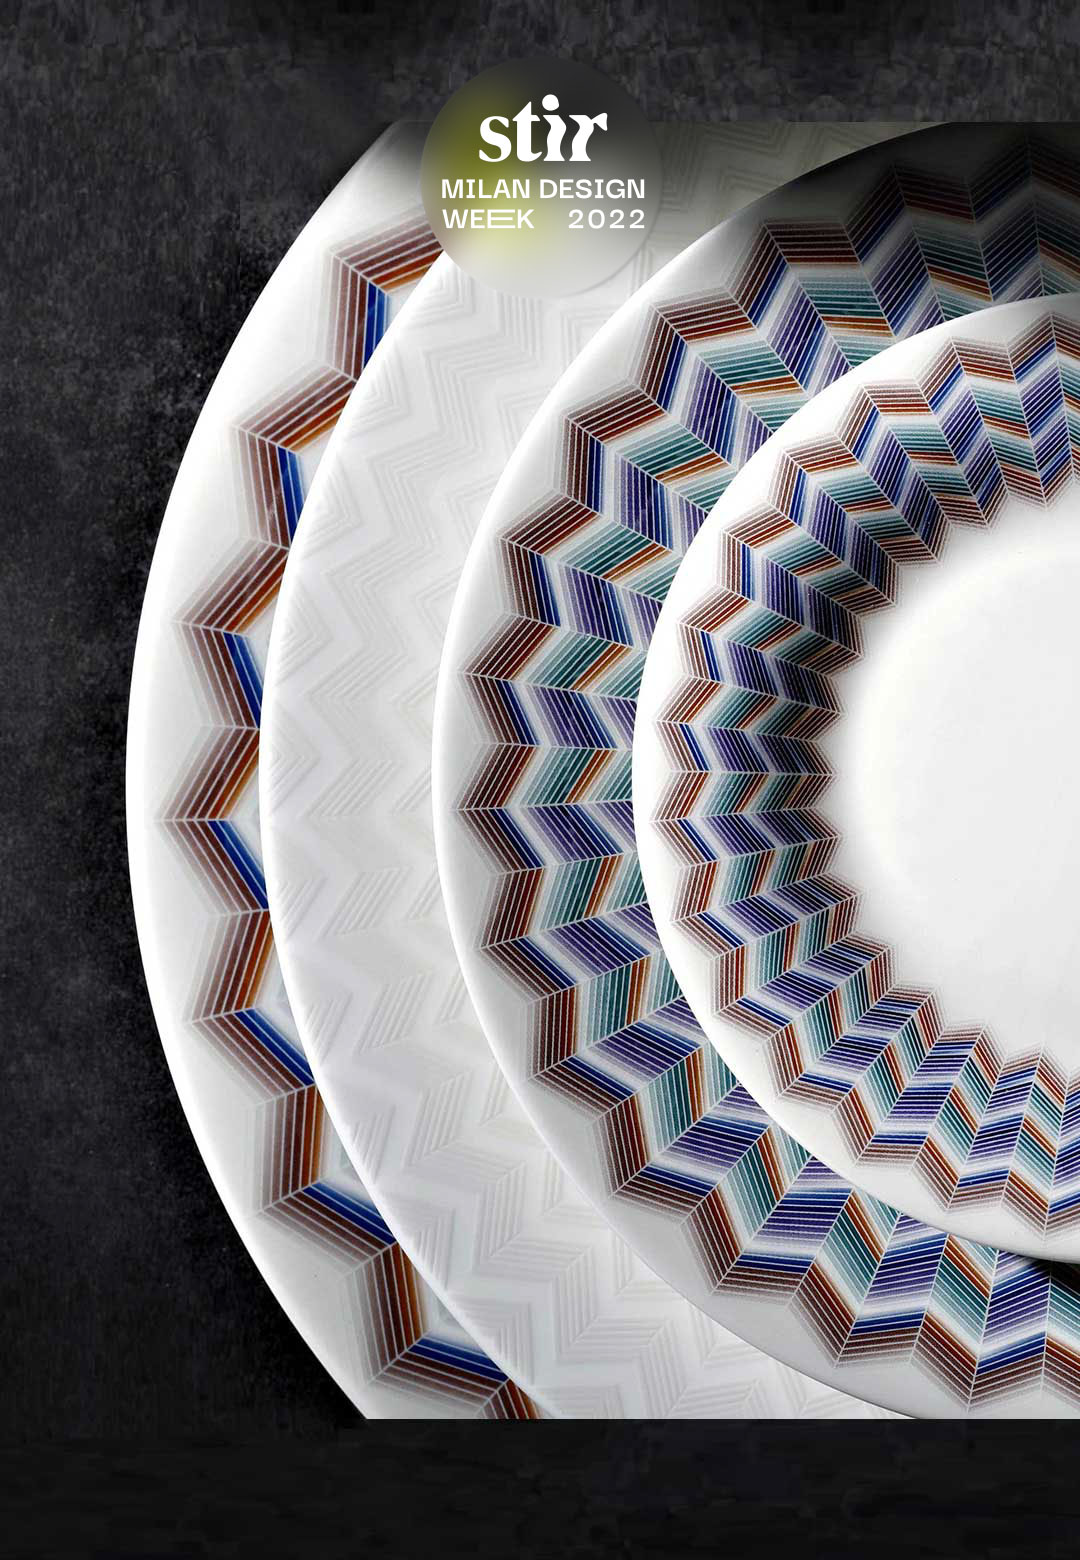 Missoni invites viewers to indulge in art with their showcase at Salone 2022